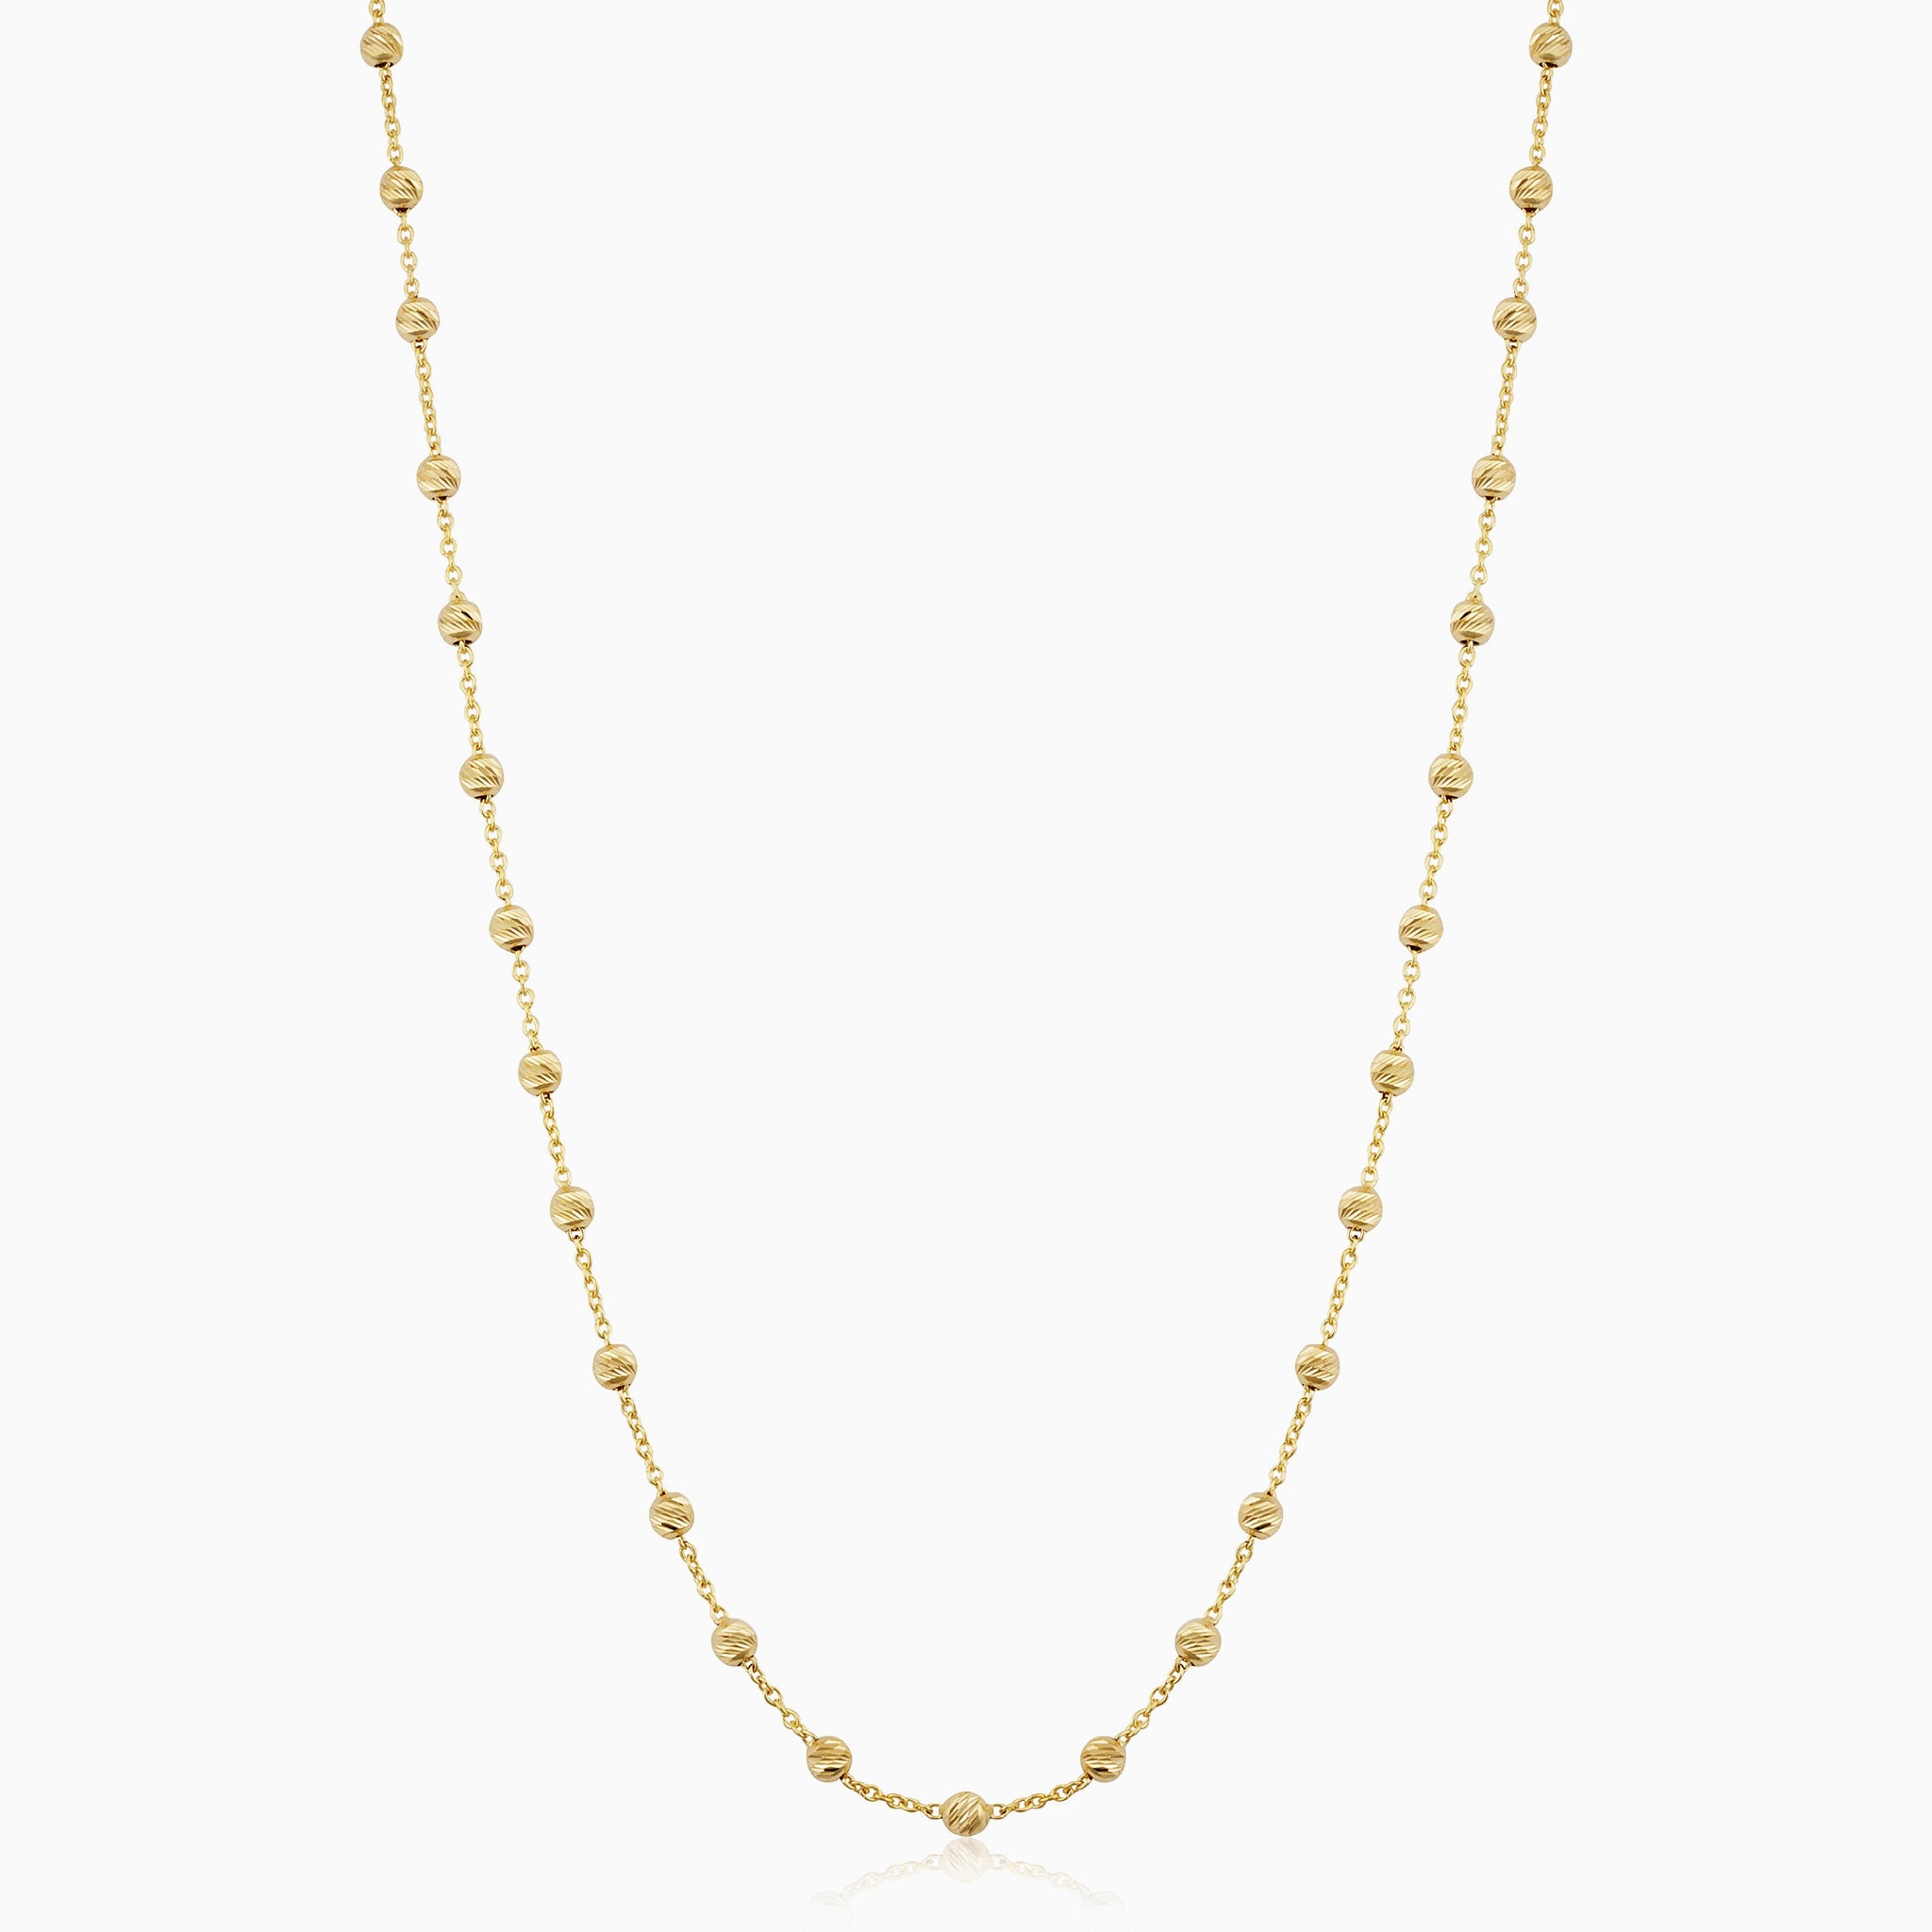 Ball Chain Multi-Strand Necklace - A New Day™ Gold